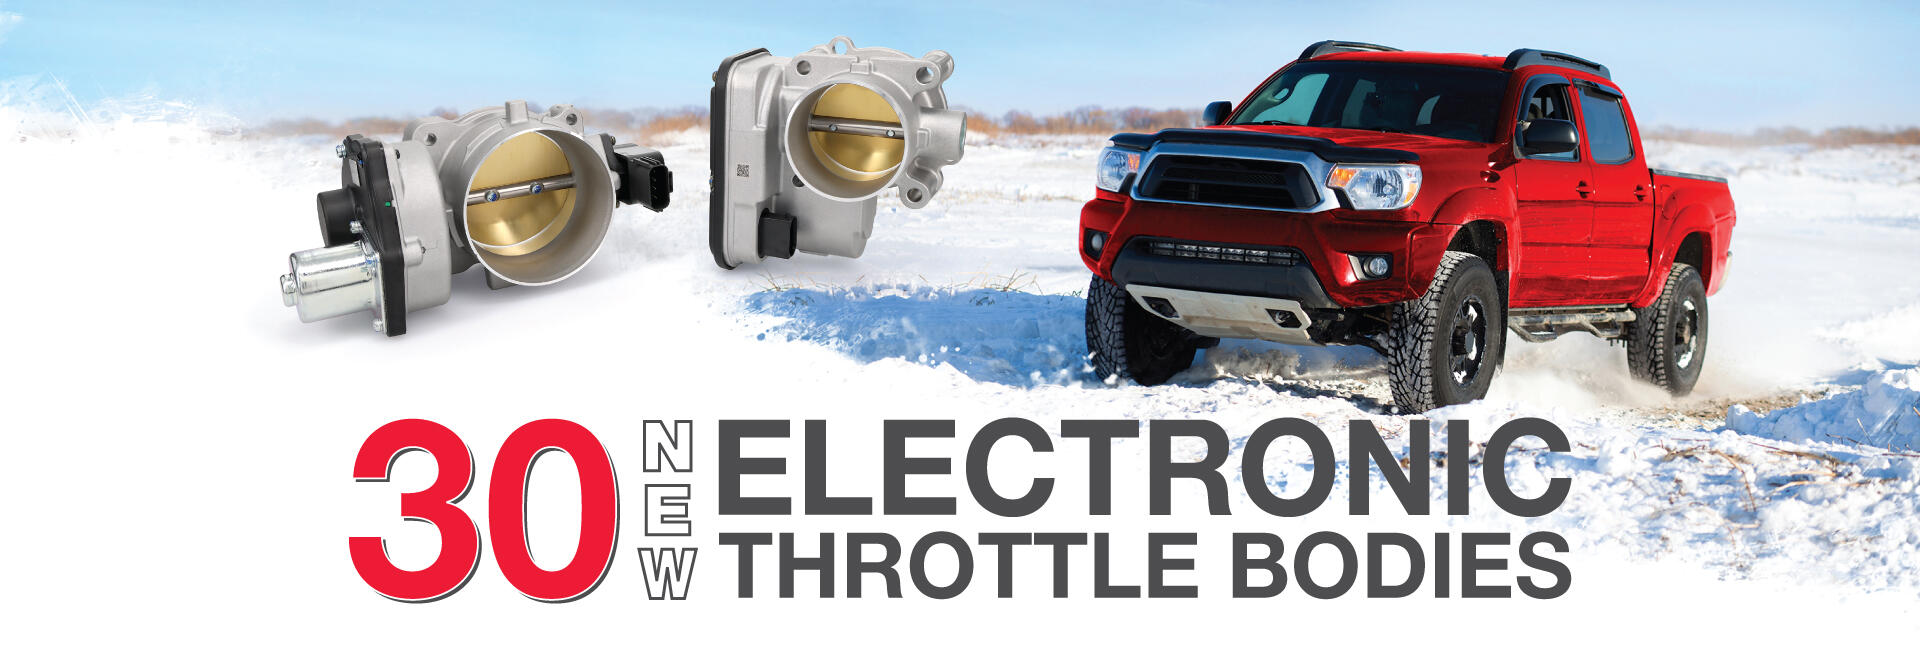 30 New Electronic Throttle Bodies Available